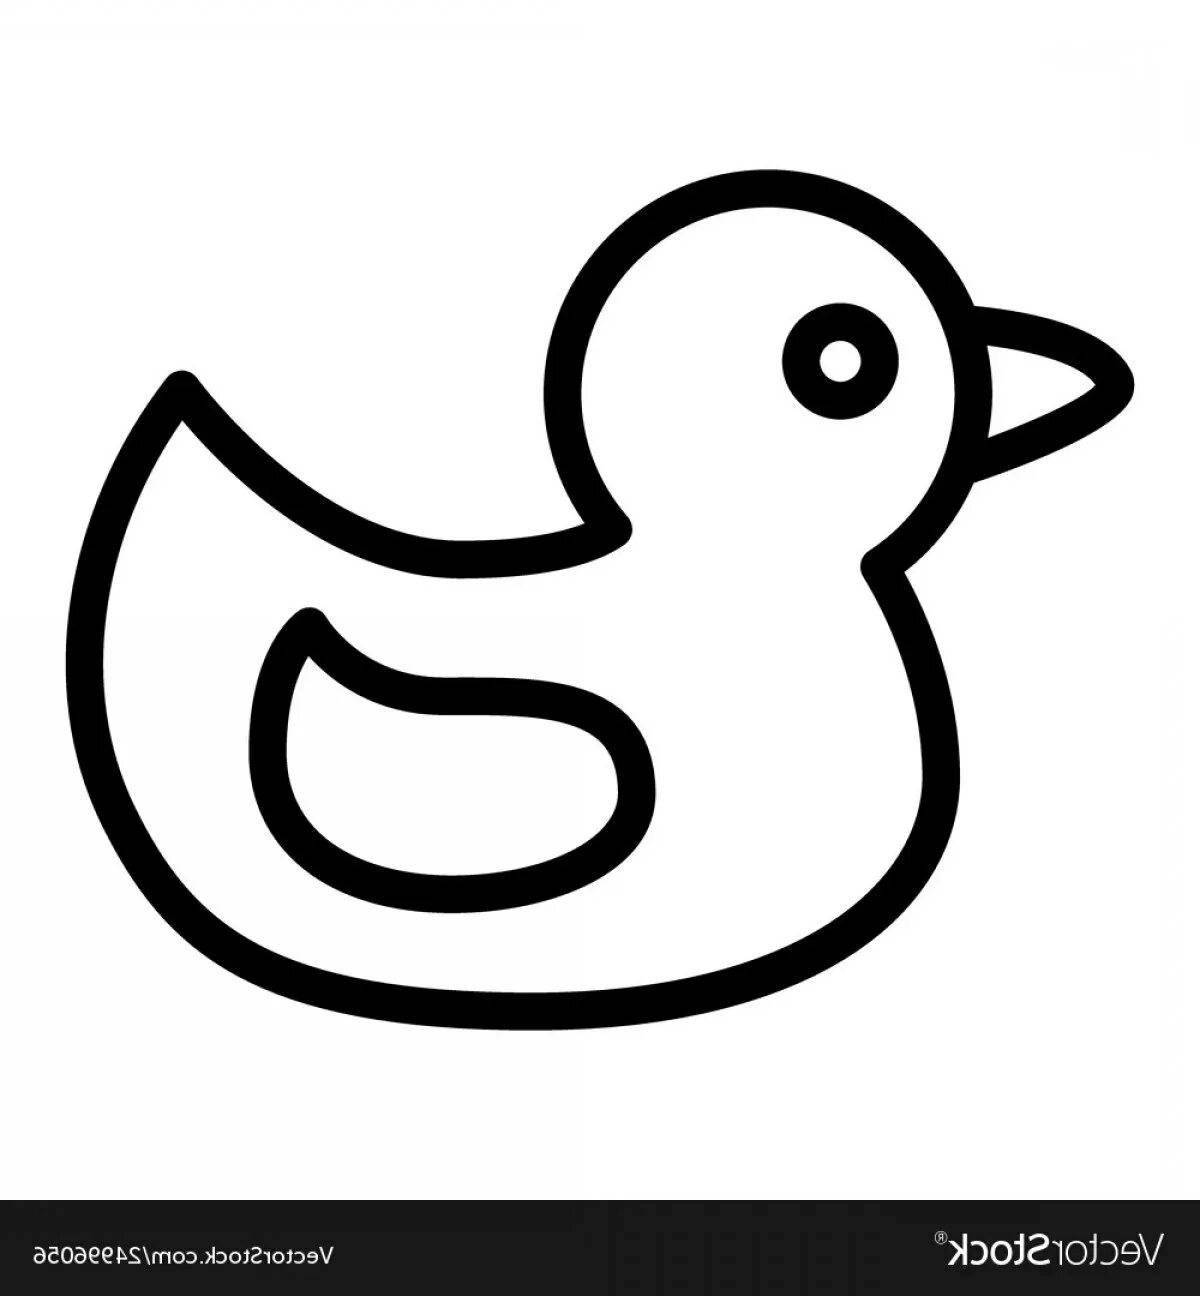 Silly rubber duck coloring page